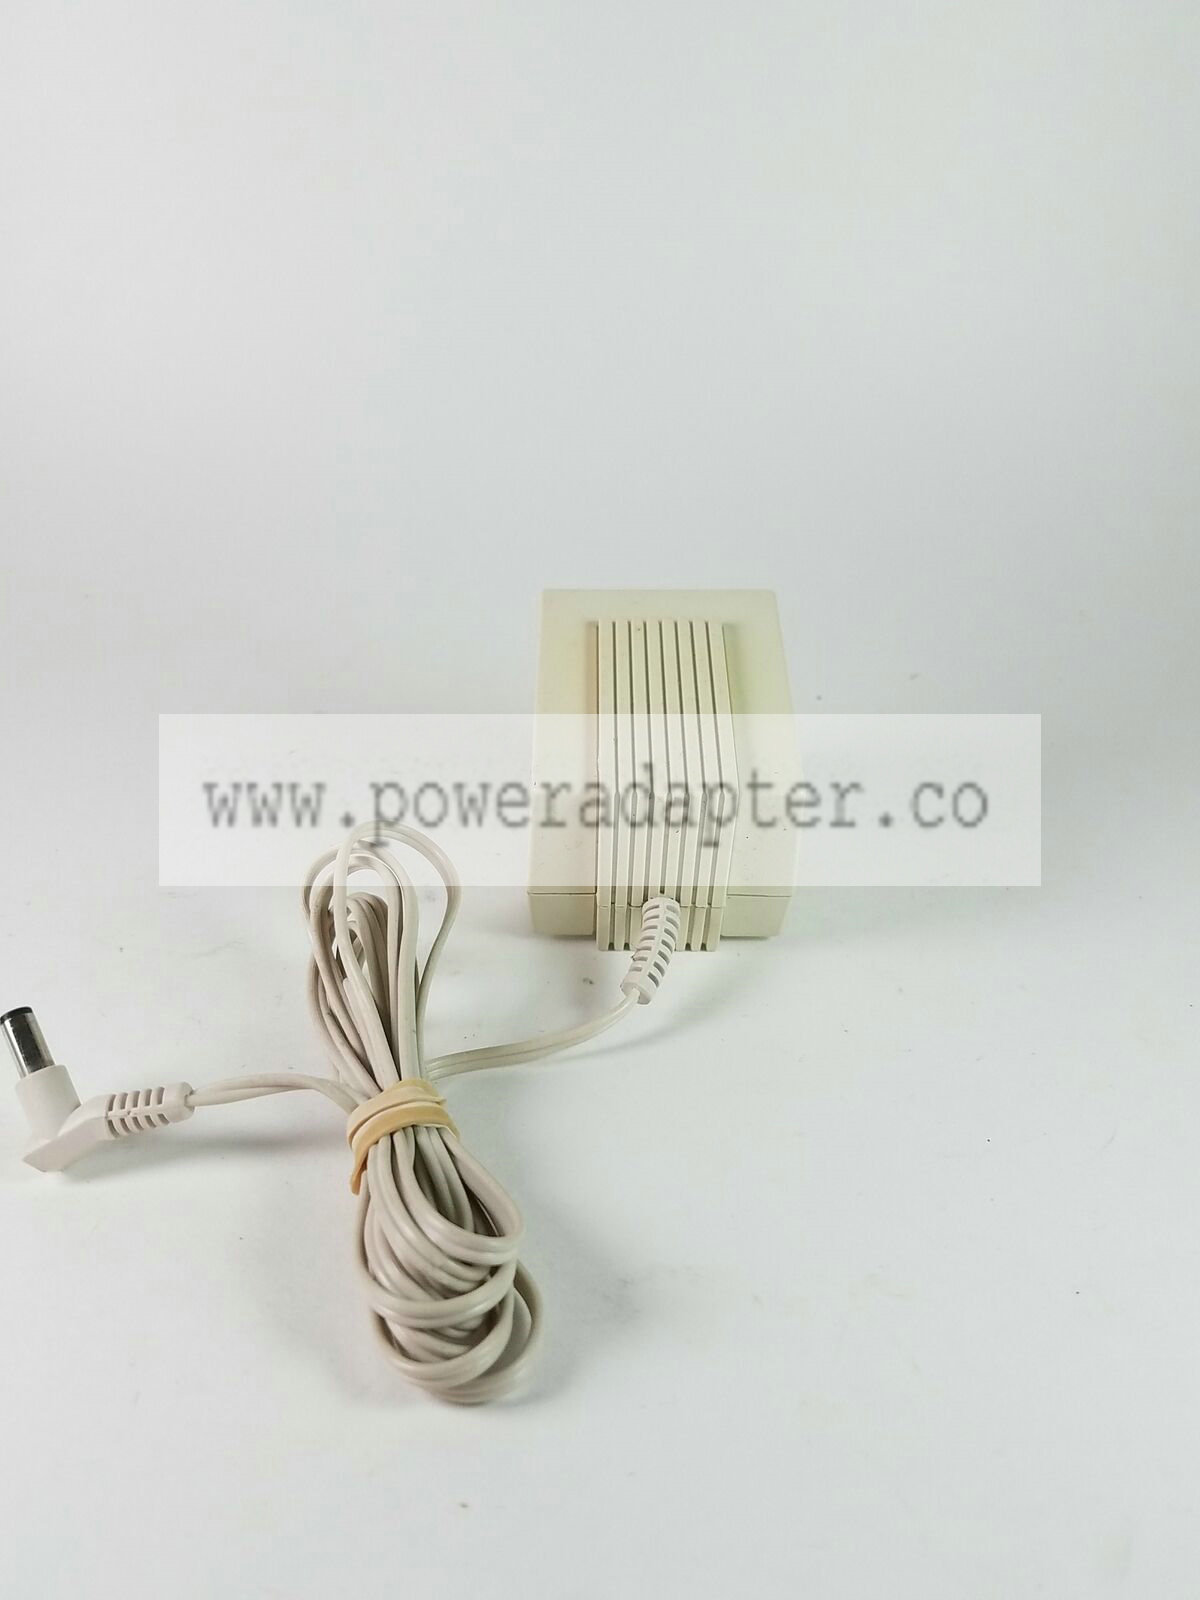 Telephone AC Power Supply Adapter Class 2 Model No. HAAW-1 9VAC 900mA MPN: HAAW-1 Output Current: 900mA Brand: unbra